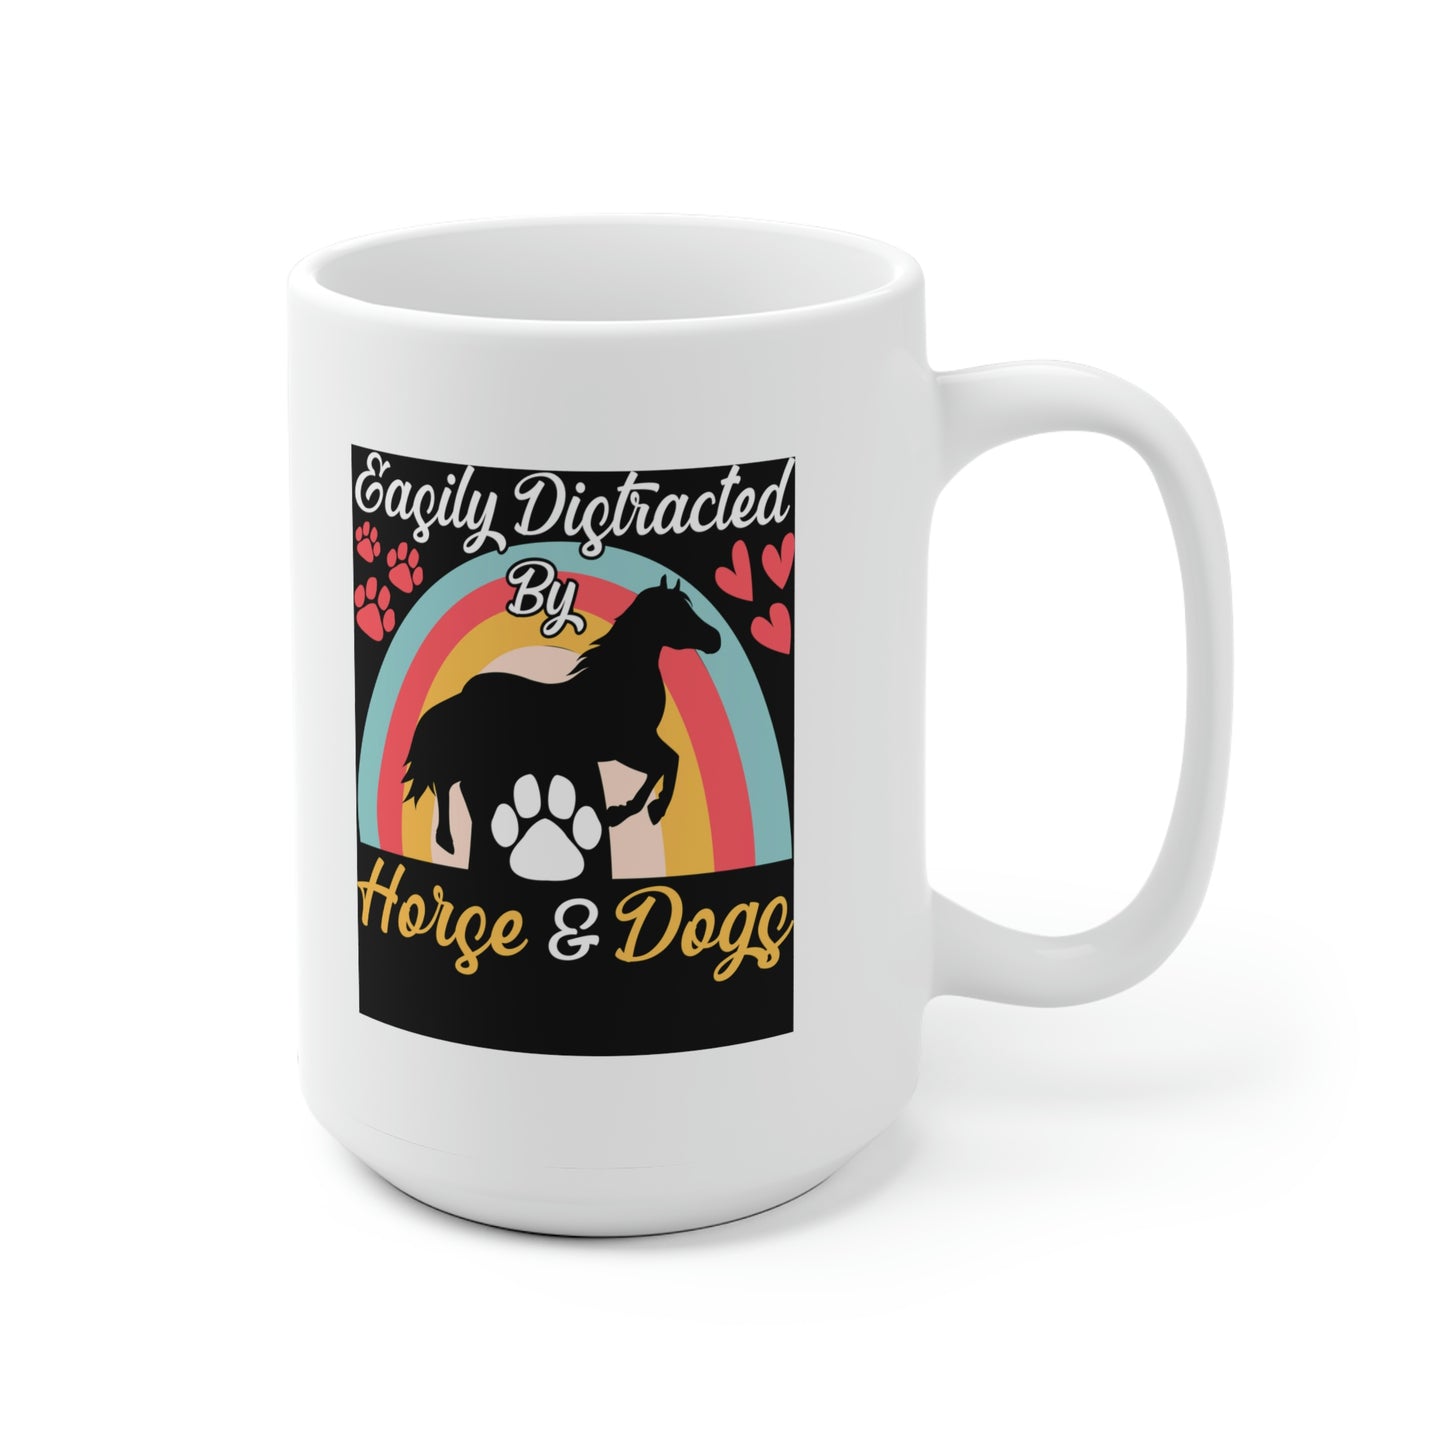 Easily Distracted by Horse and Dogs White Ceramic Mug